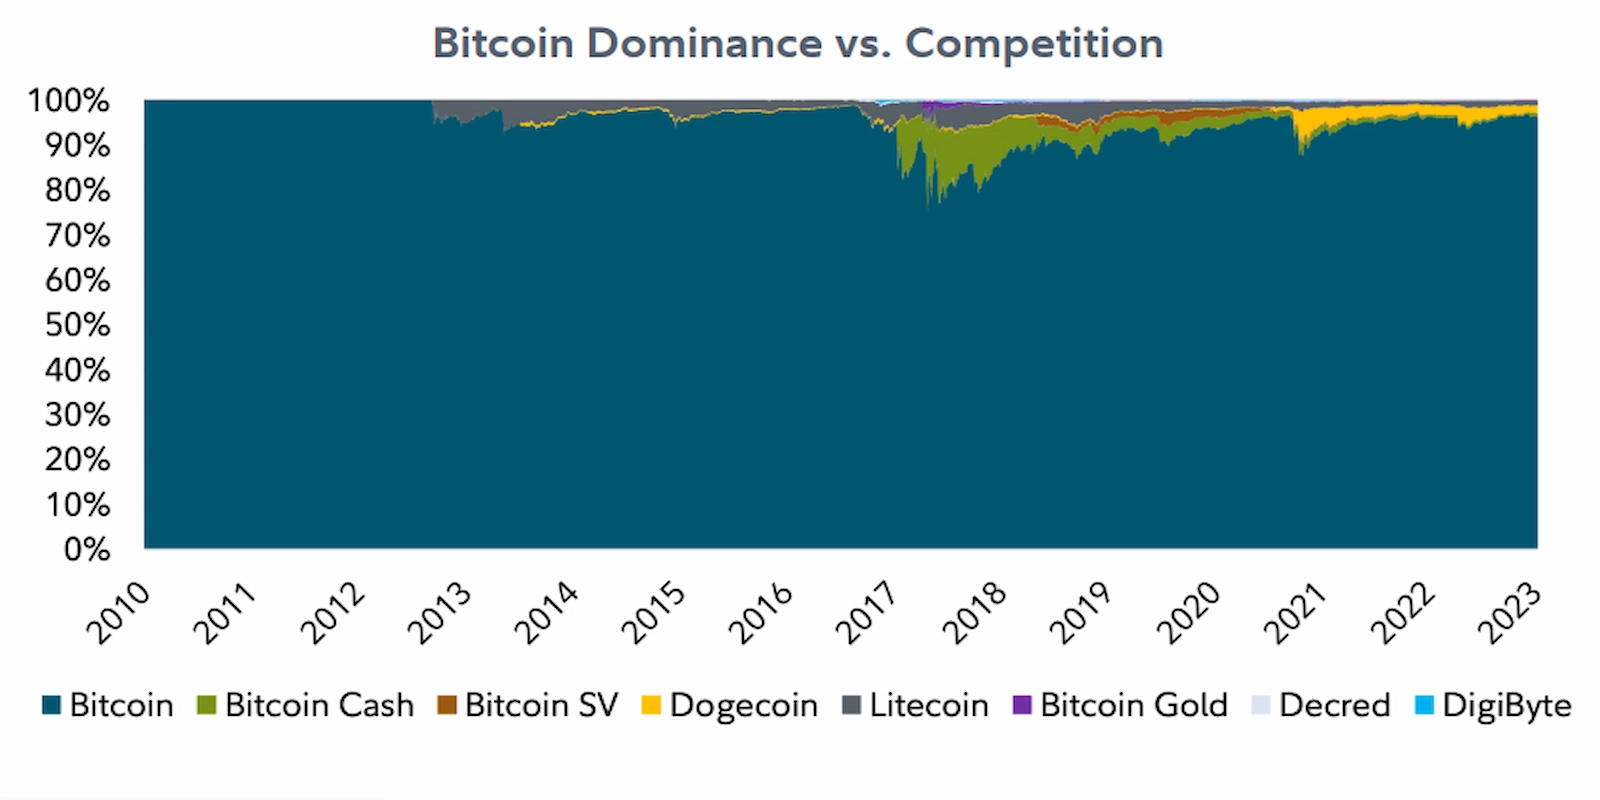 Bitcoin completely dominates its competition